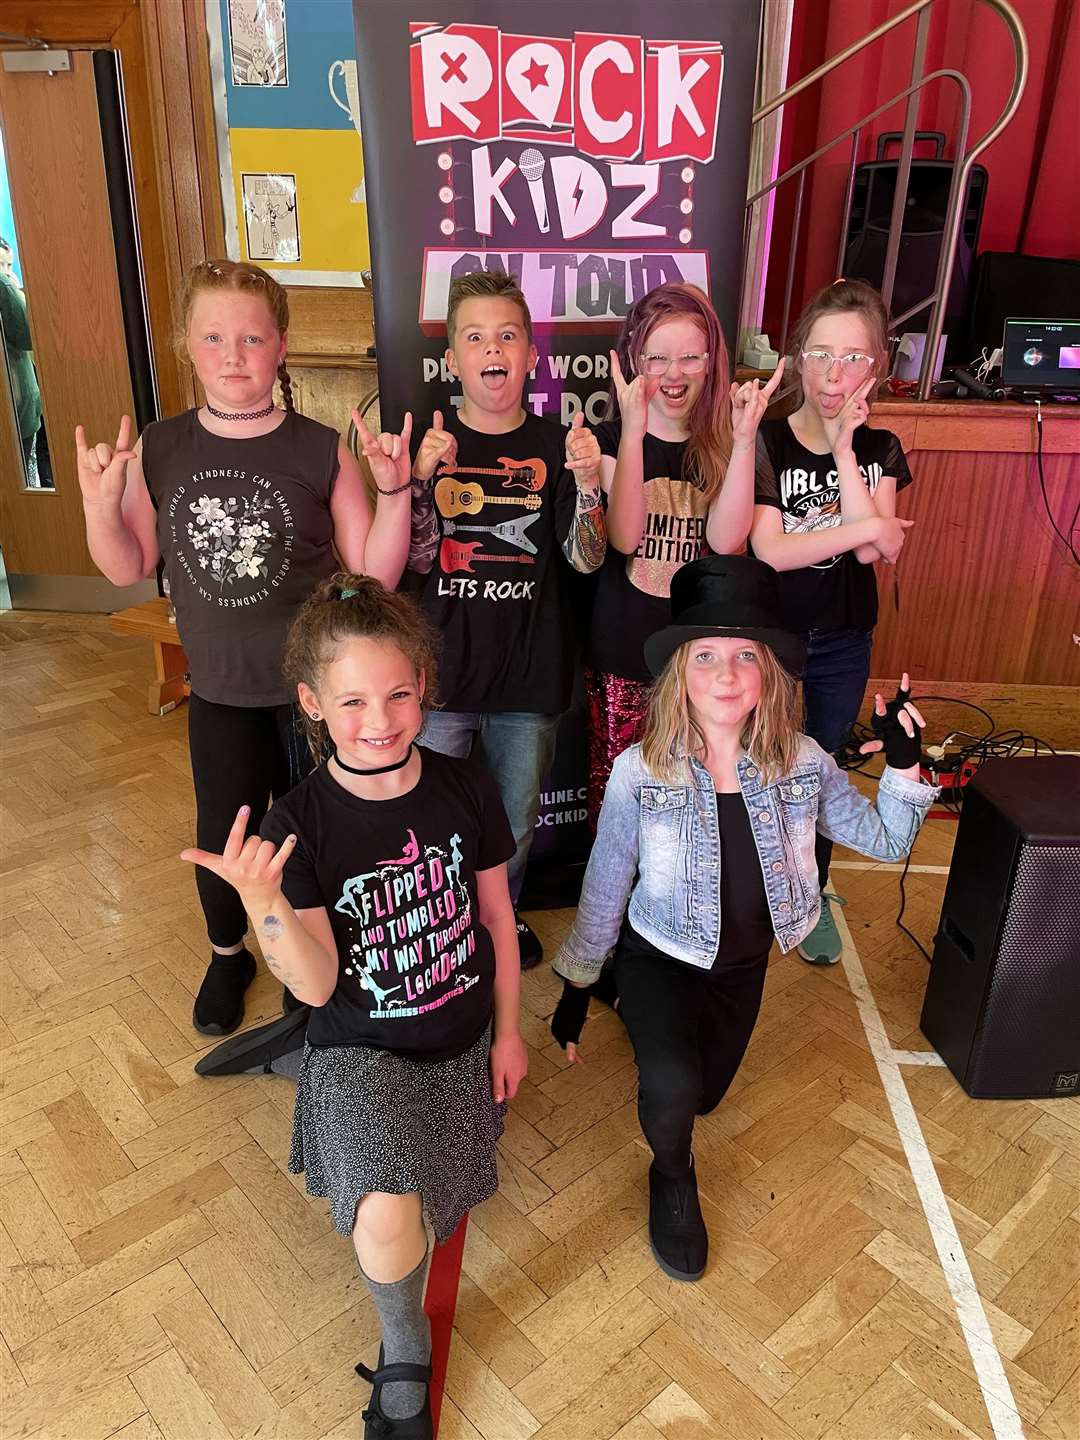 Ready to rock? Pupils get in the spirit of the workshops.